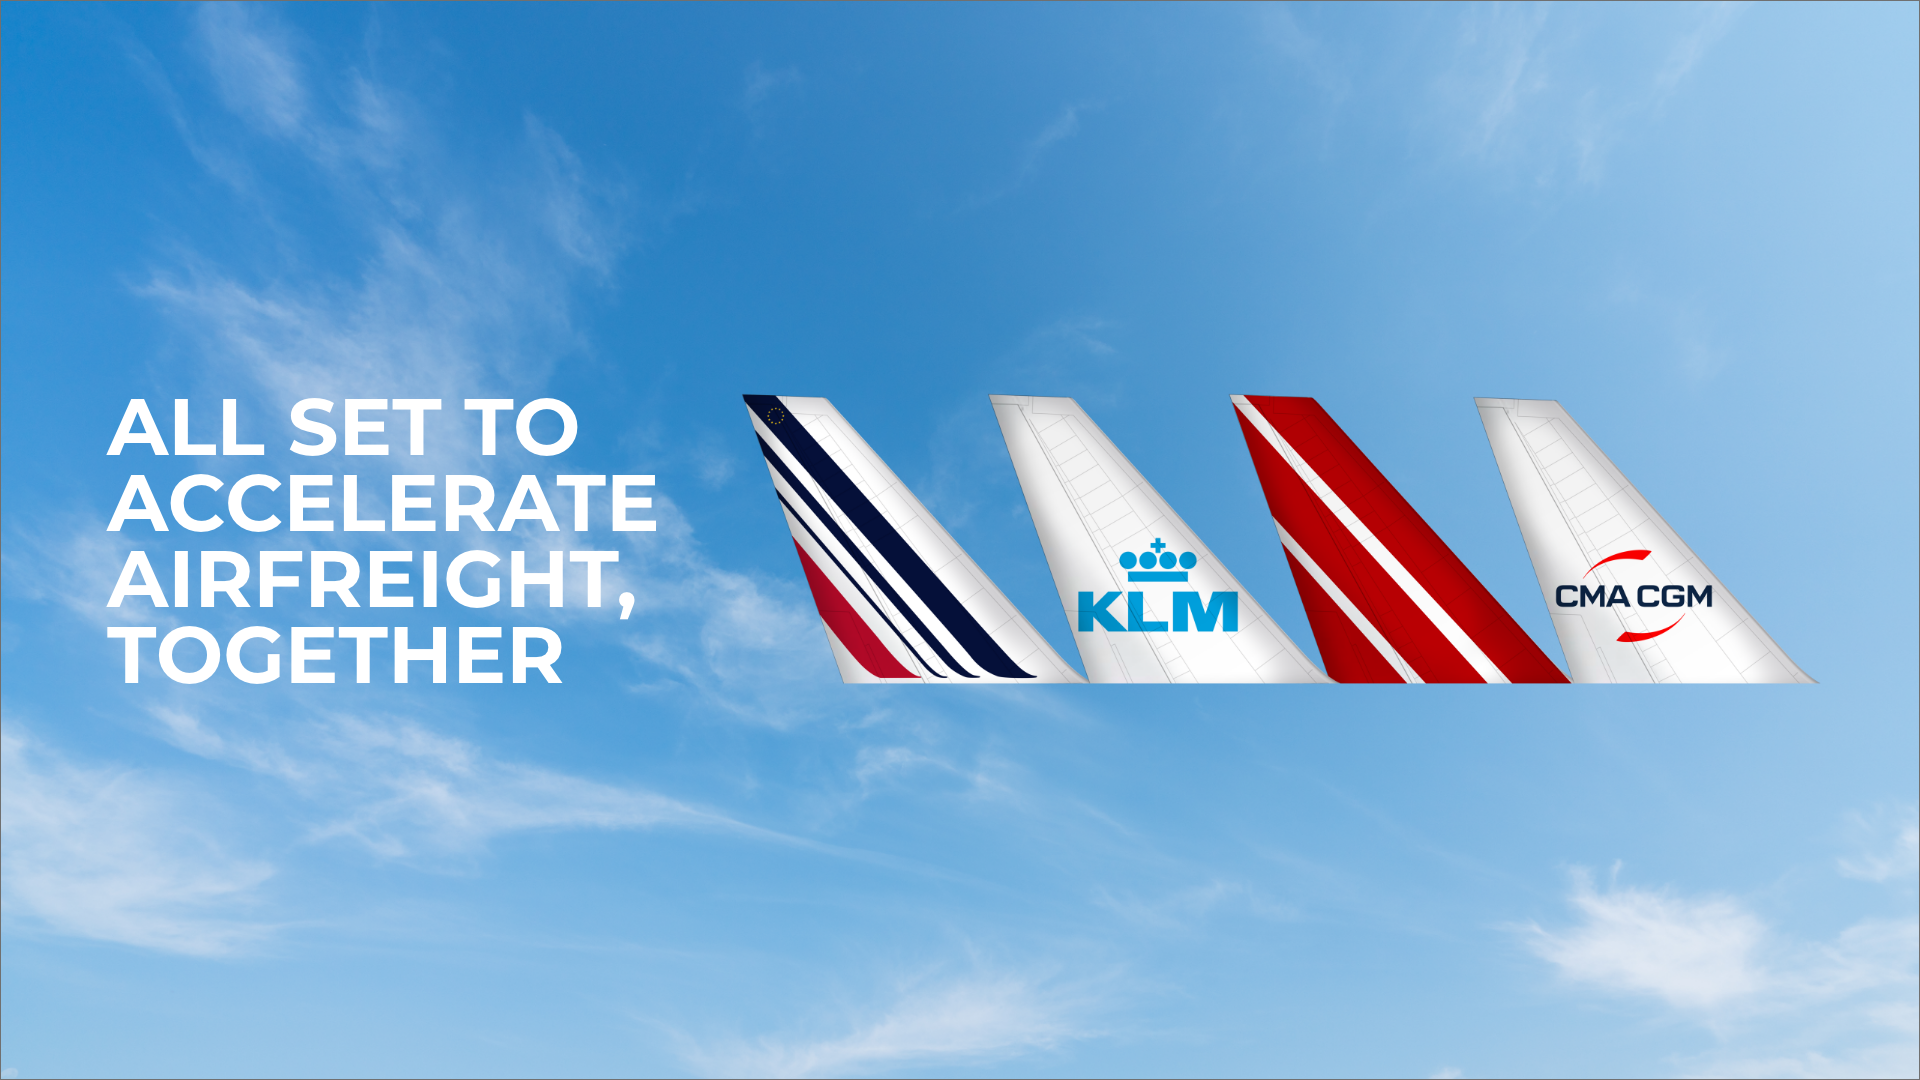 Air France-KLM orders new Airbus freighter, passenger aircraft